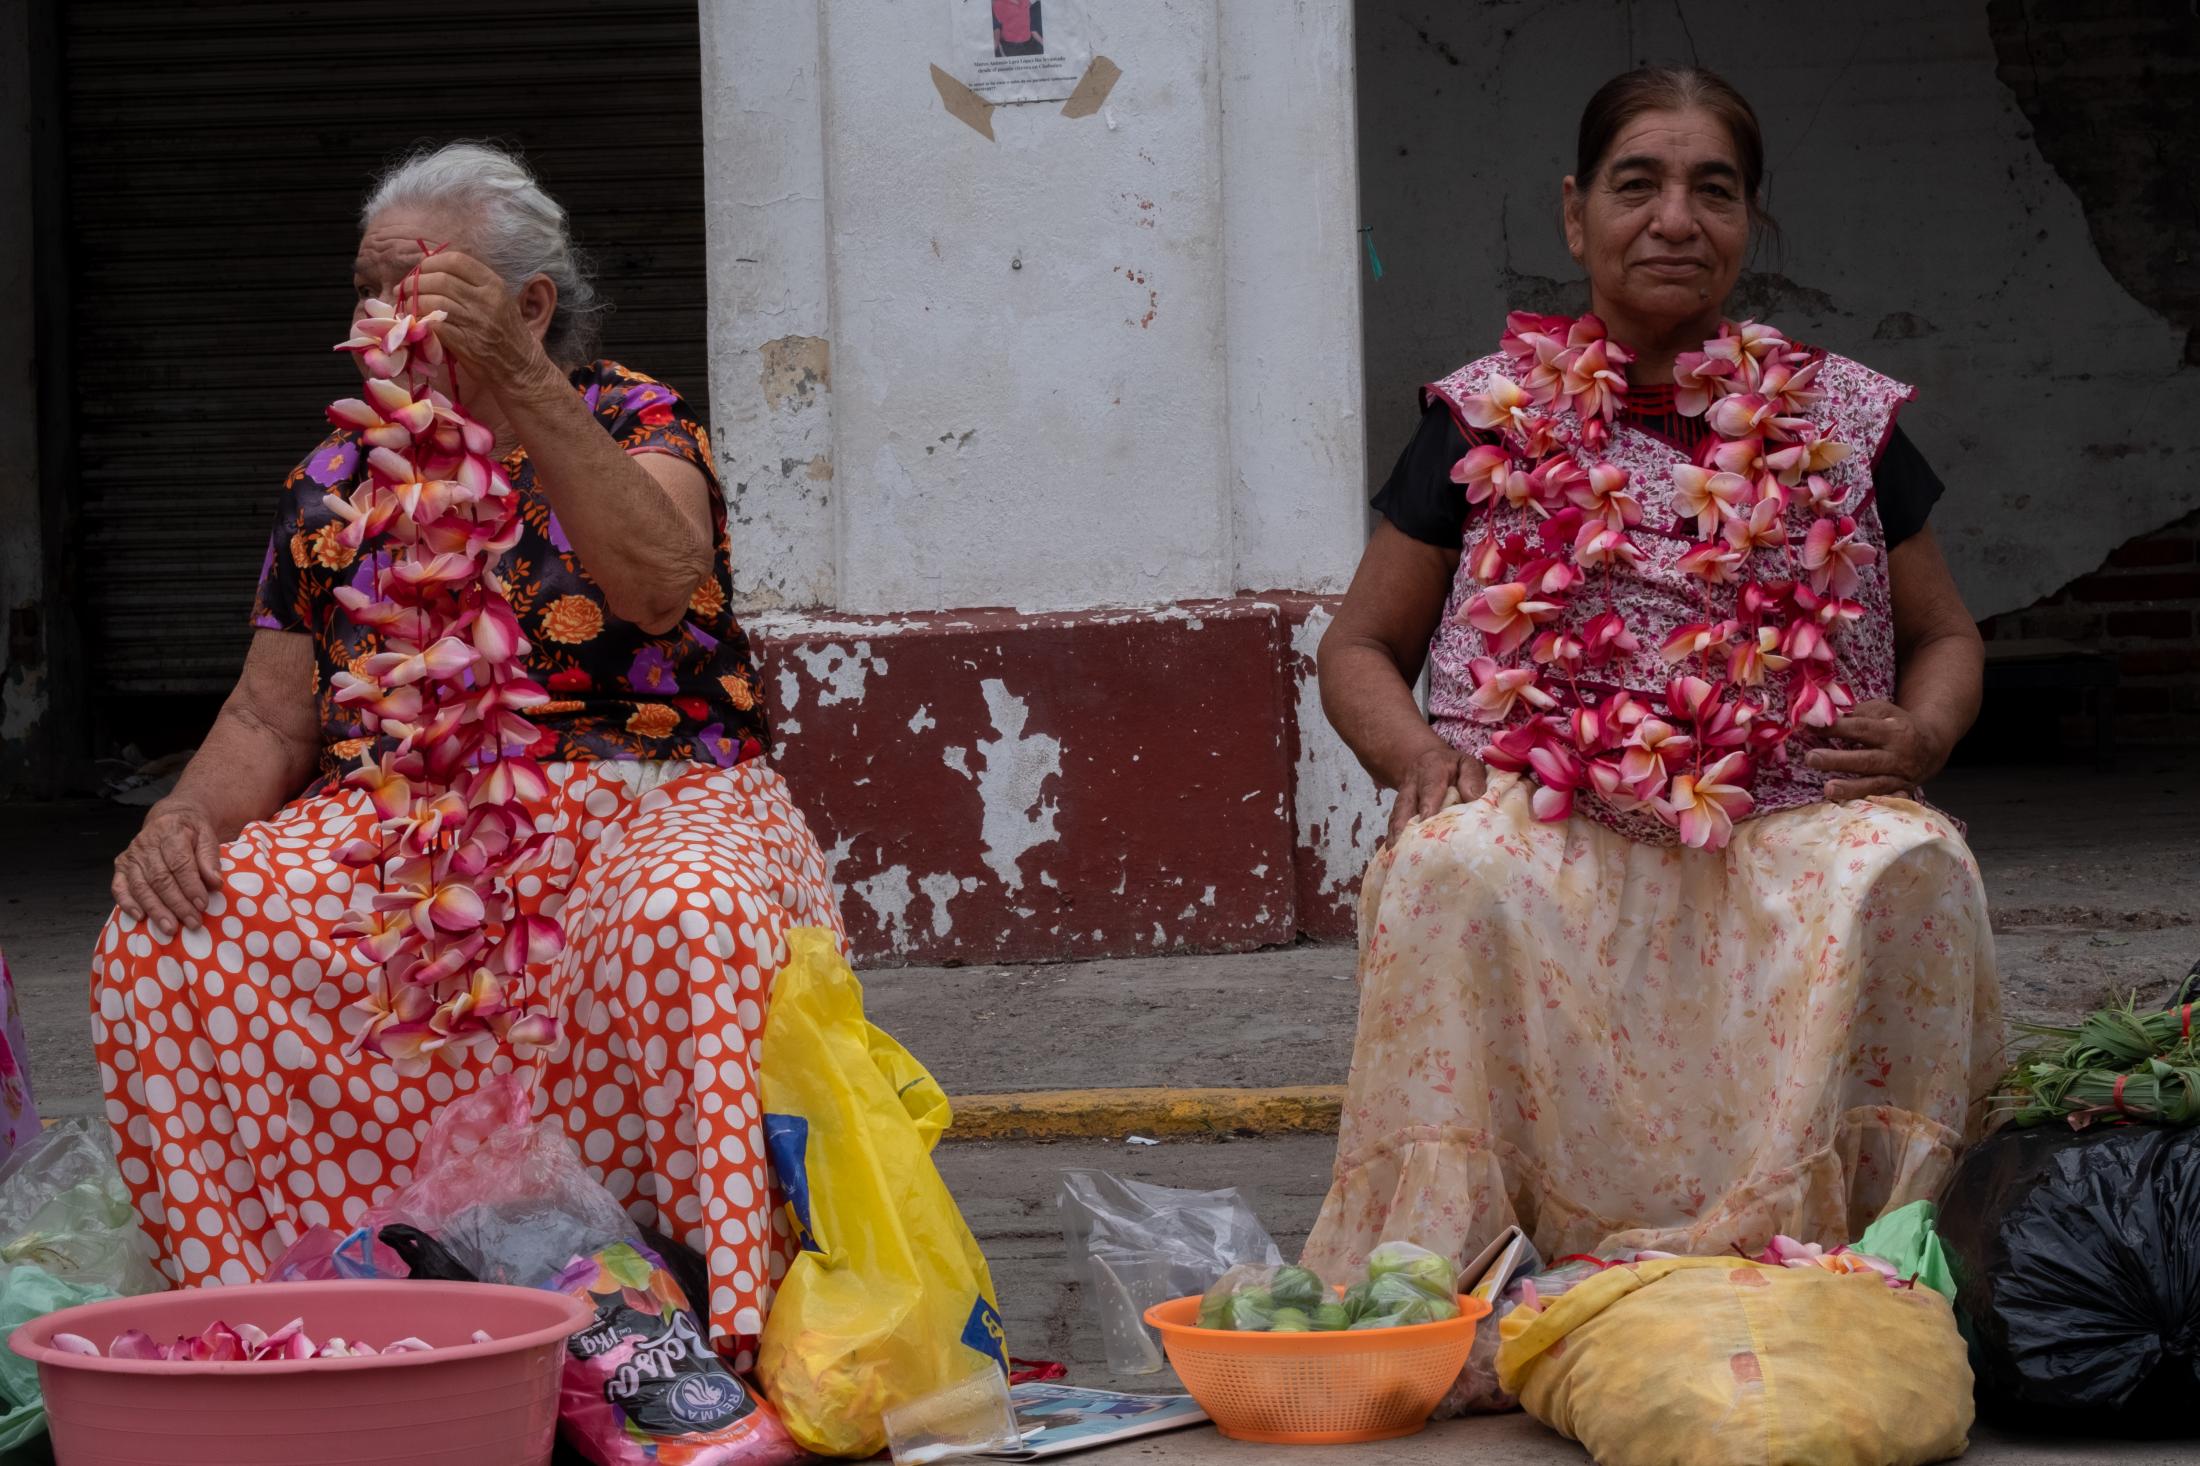  When you walk into Zapotec markets in Juchitan, Women will be the leading traders in the community. Their leading role goes beyond that, they produce most artisanry and foods that for centuries have continued to sustain communities through a local economy. 